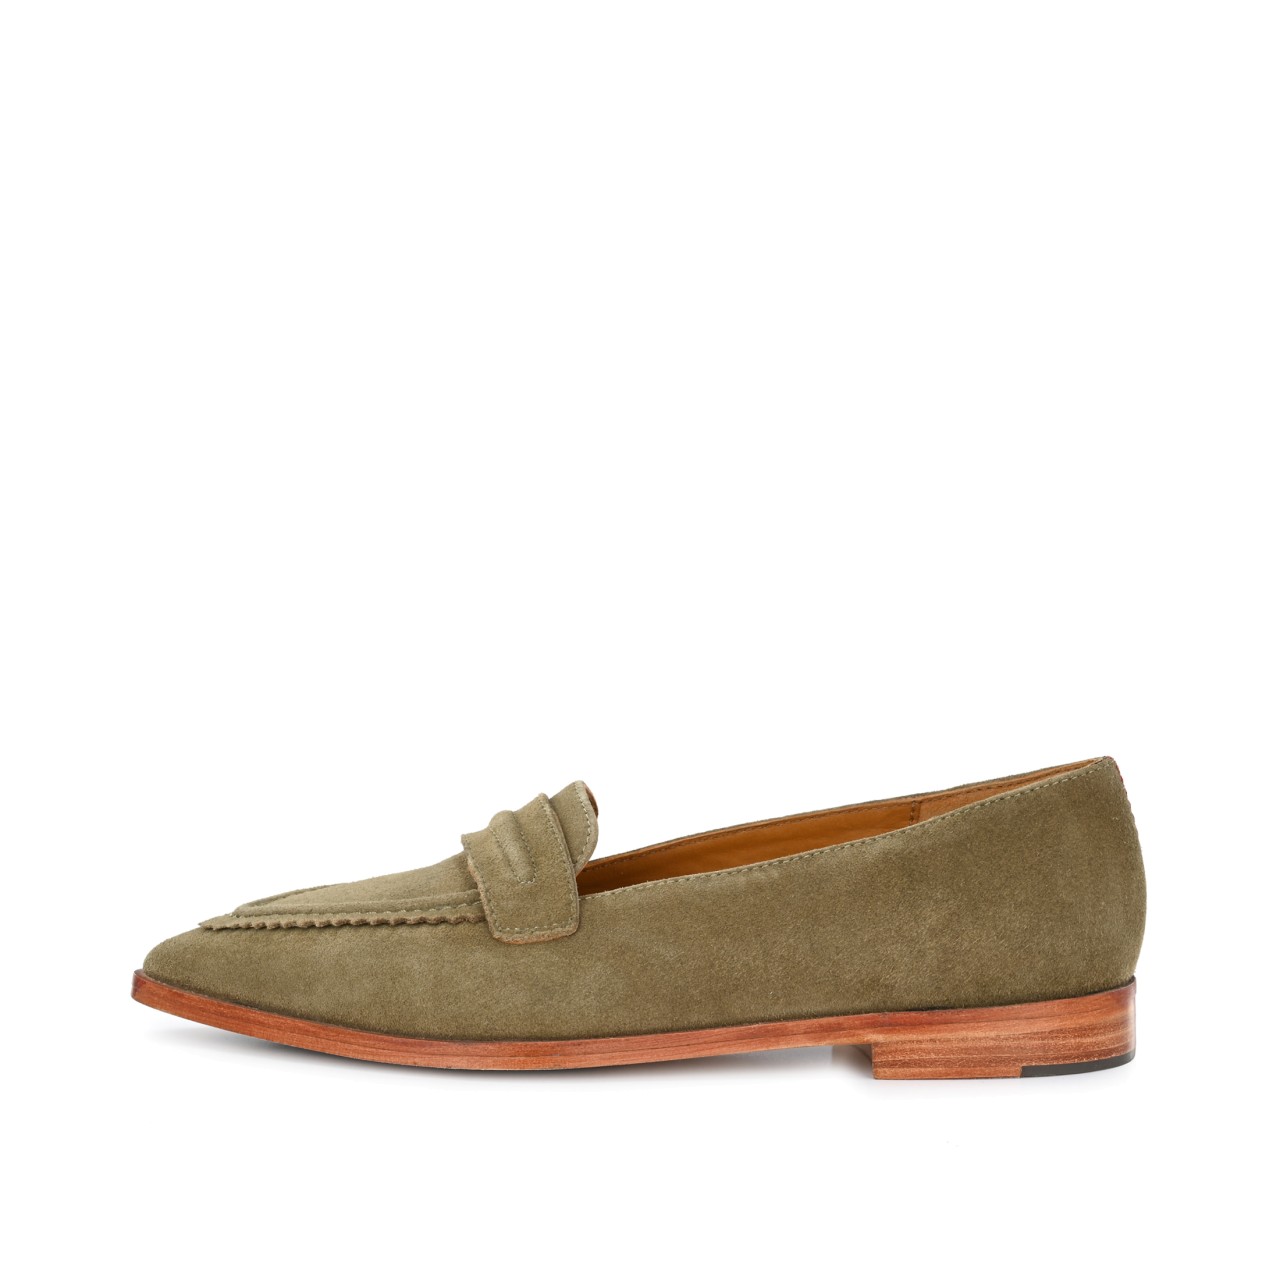 LEANDRA Suede Oliv